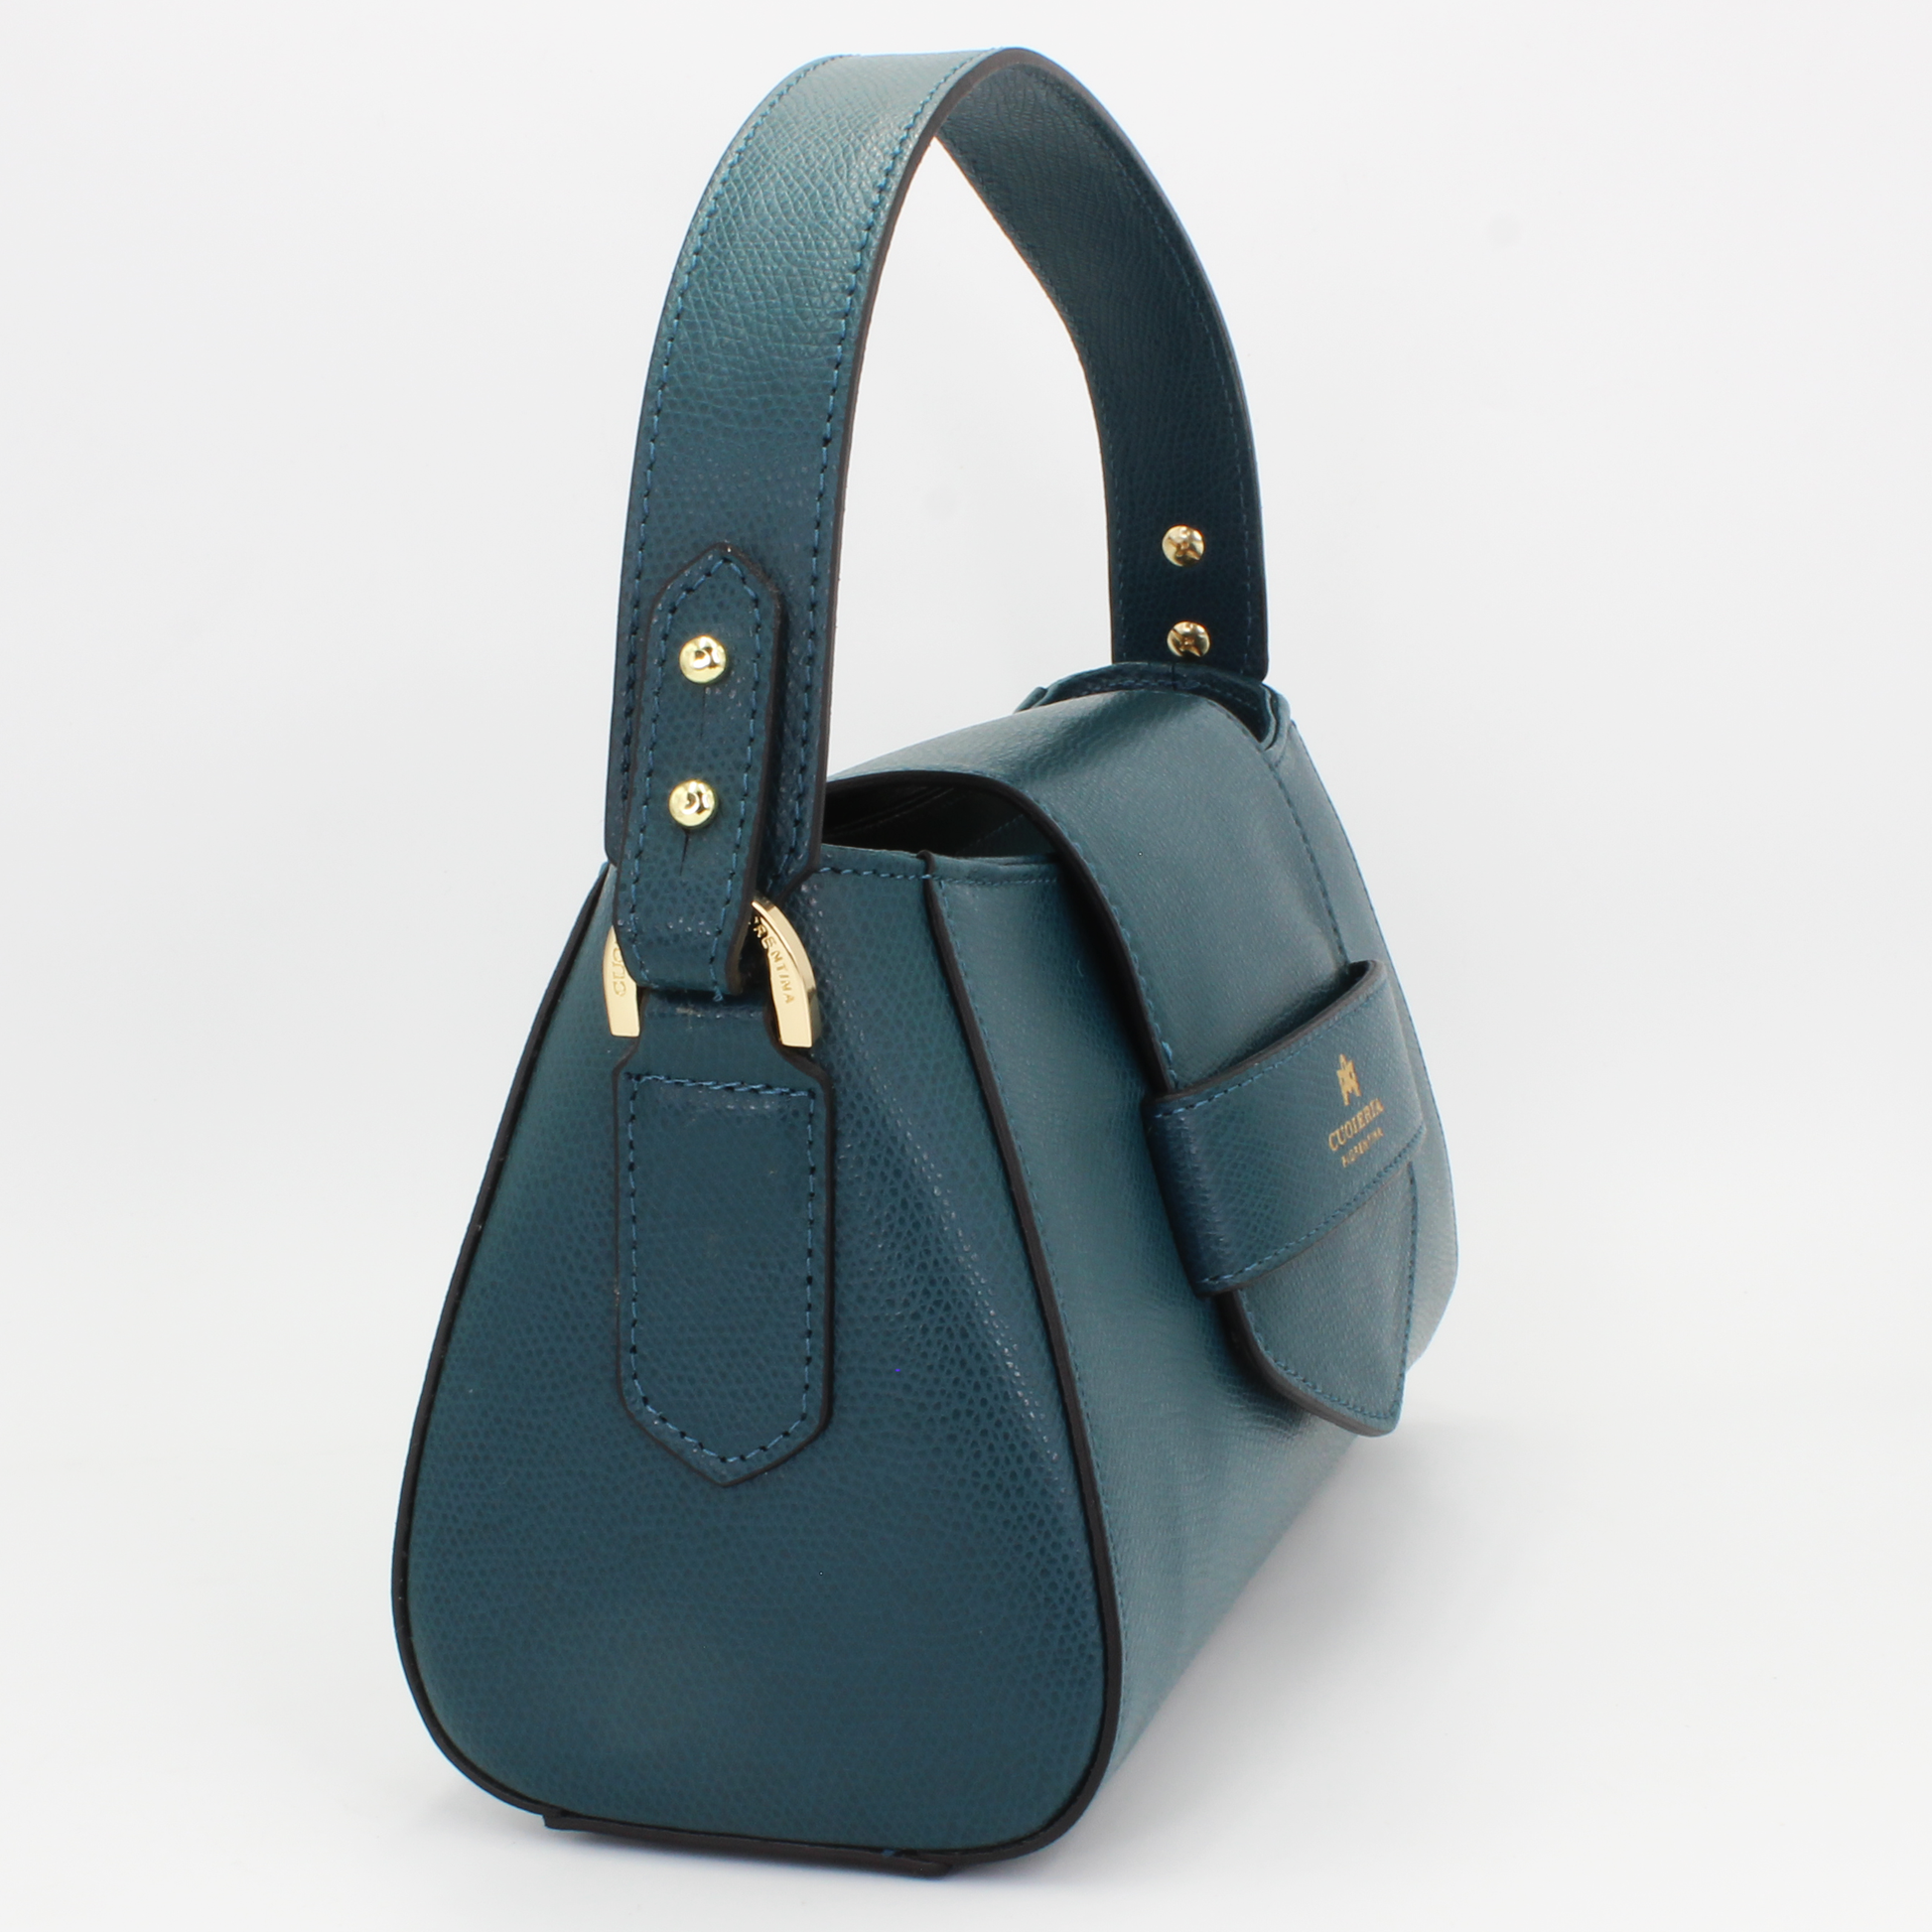 Shop Womens Italian-made Leather small handbag in petrolio (B000005932420) or browse our range of hand-made Italian handbags for women in-store at Aliverti Cape Town, or shop online.   We deliver in South Africa & offer multiple payment plans as well as accept multiple safe & secure payment methods.